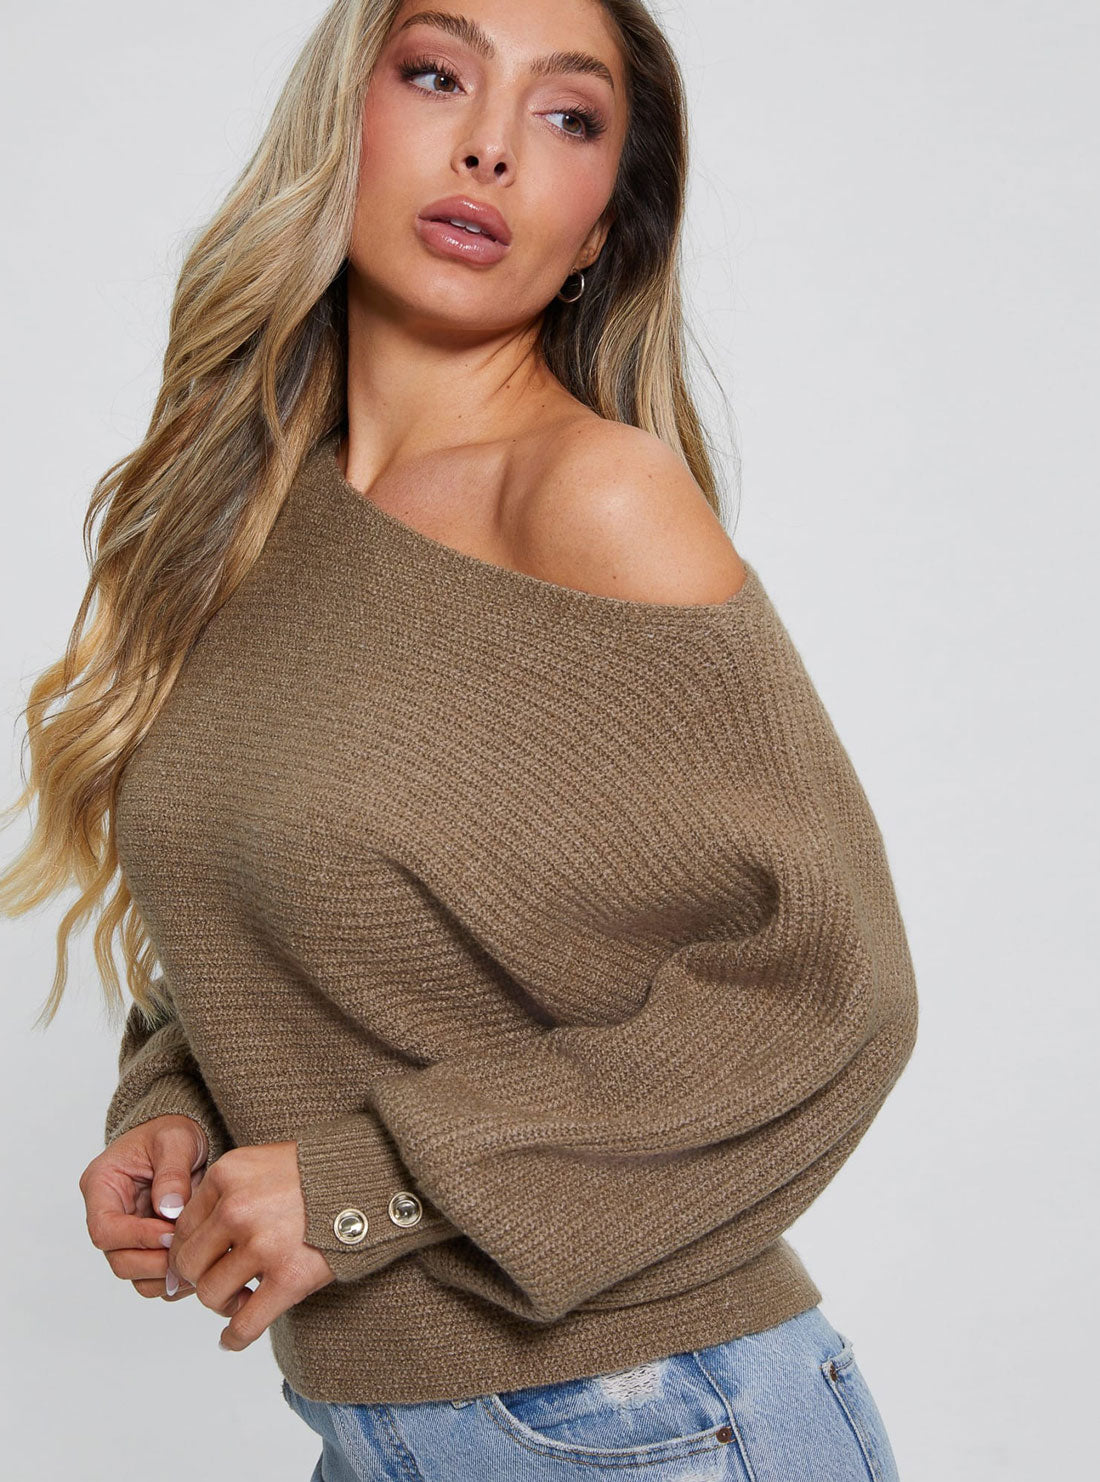 Brown Isadora Off-Shoulder Knit Top | GUESS Women's Apparel | detail view